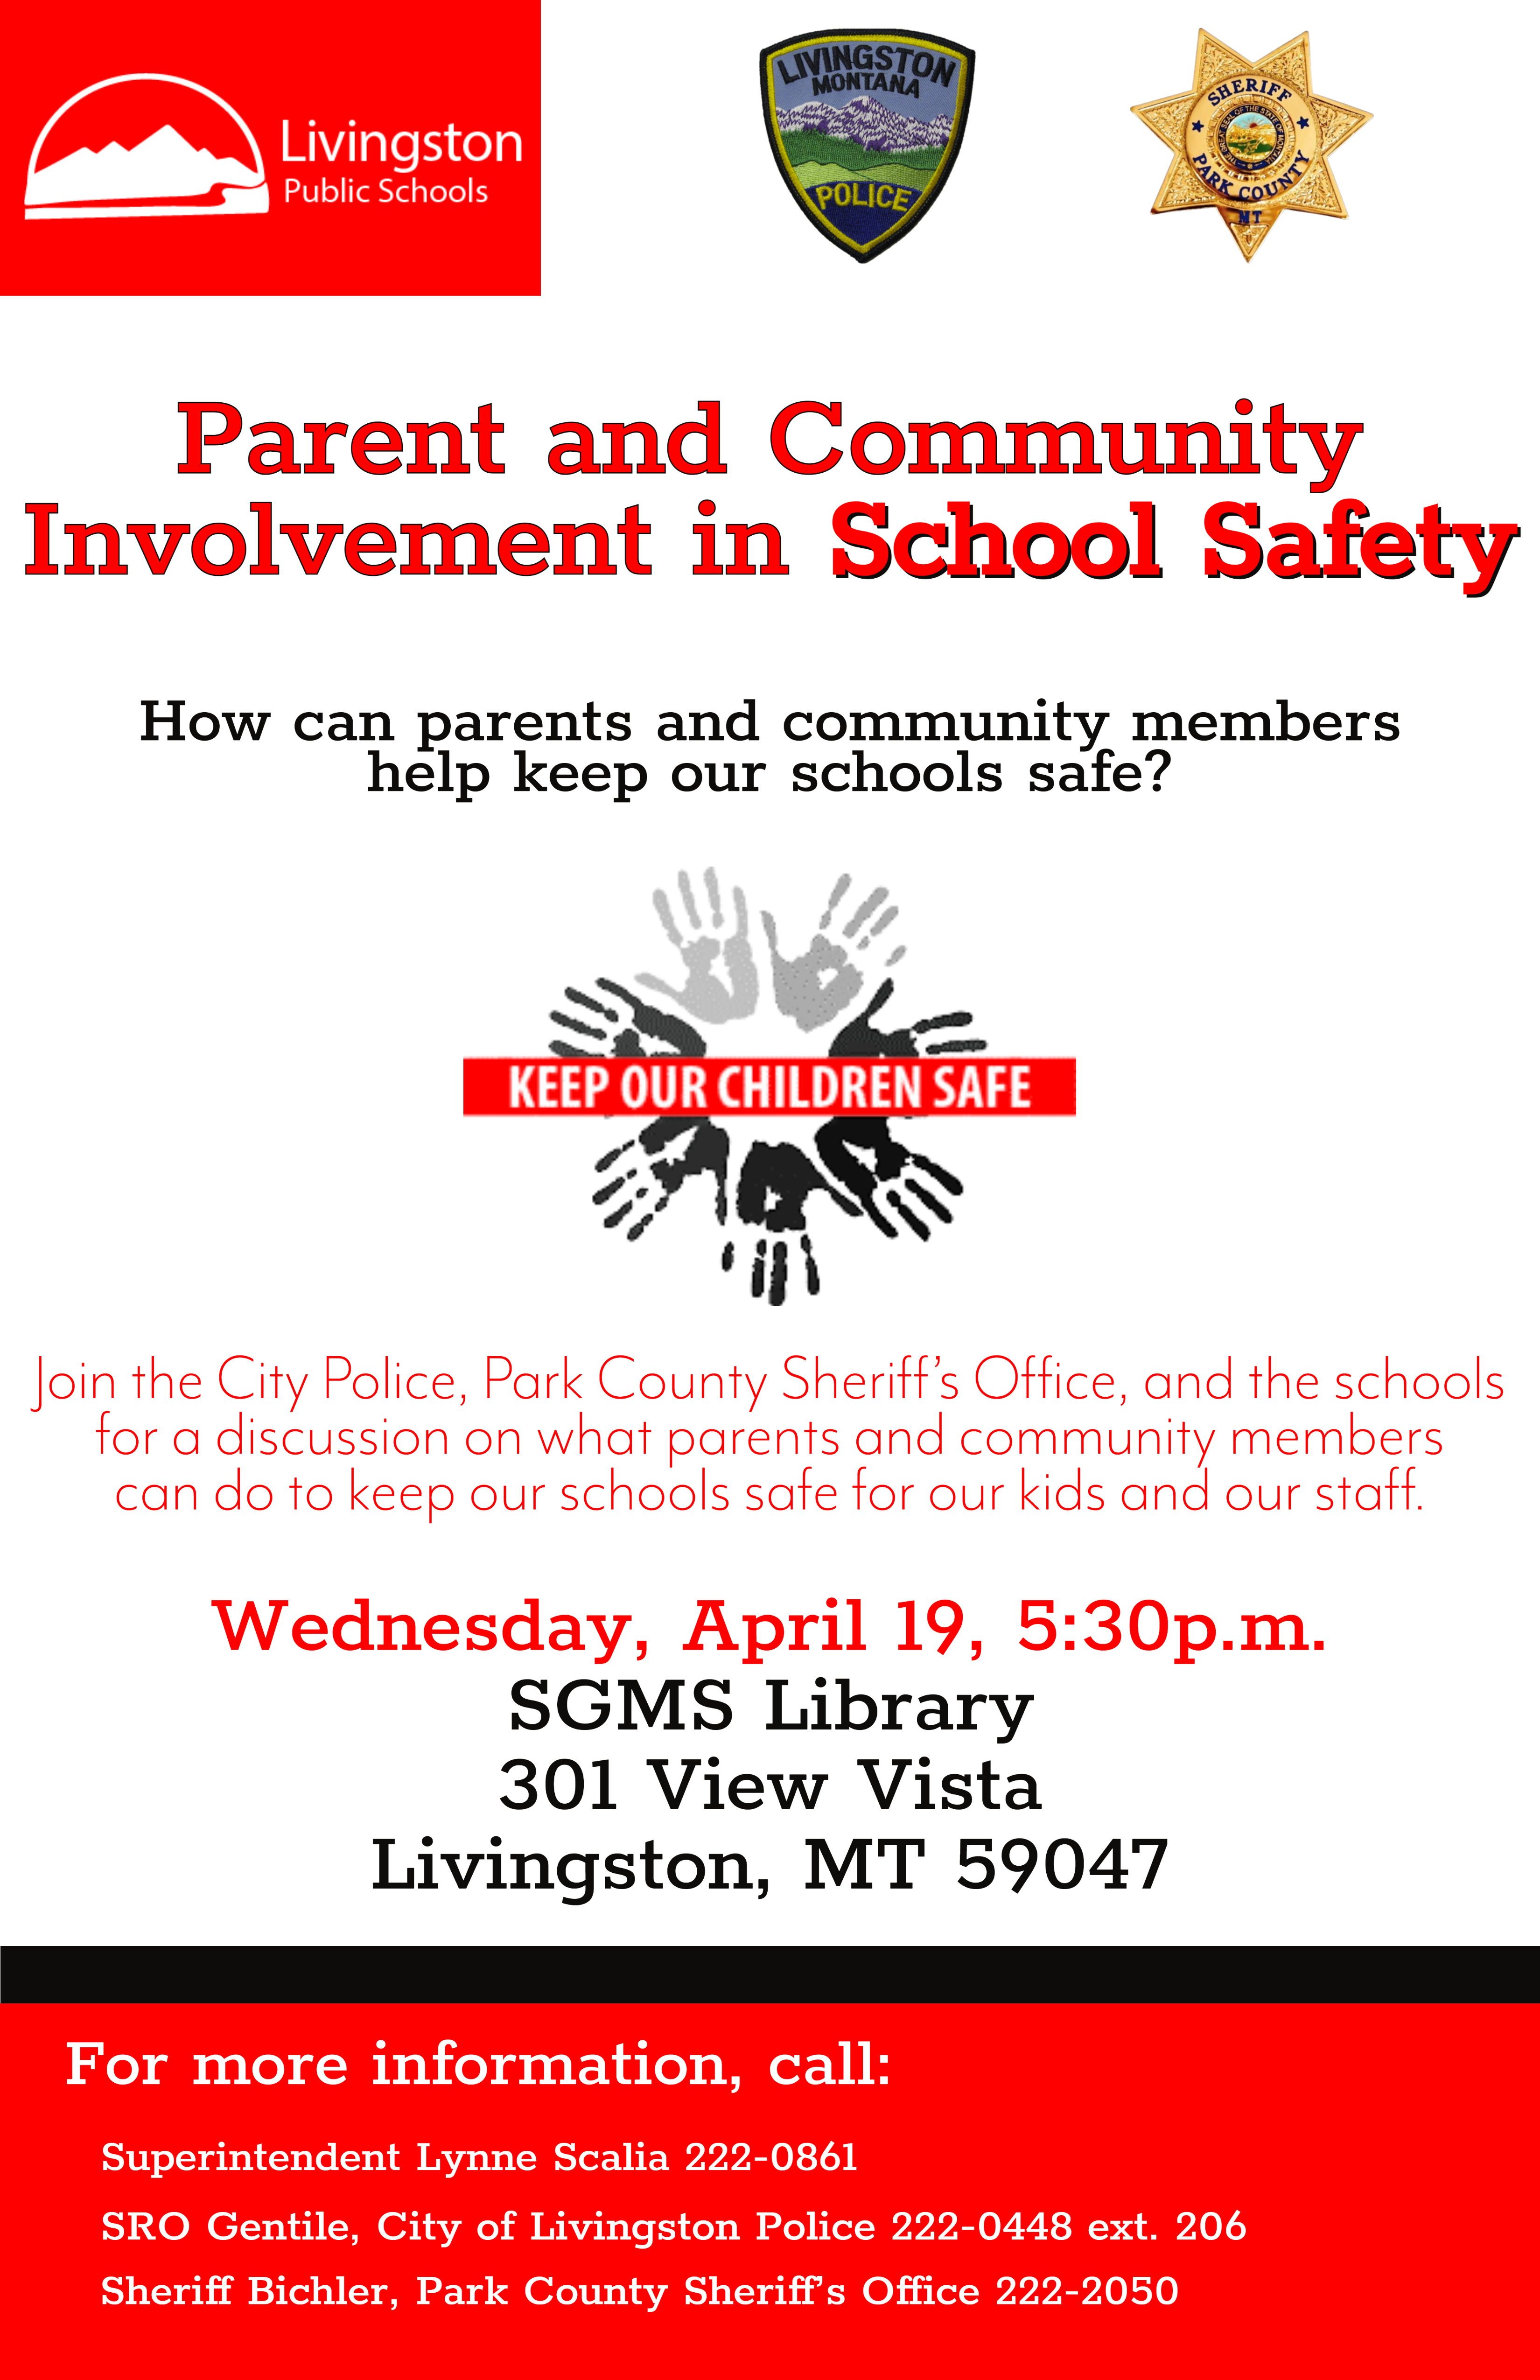 Parent and Community Involvement in School Safety How can parents and community members help keep our schools safe? Join the City Police, Park County Sheriff’s Office, and the schools for a discussion on what parents and community members can do to keep our schools safe for our kids and our staff. Wednesday, April 19, 5:30p.m. SGMS Library 301 View Vista Livingston, MT 59047